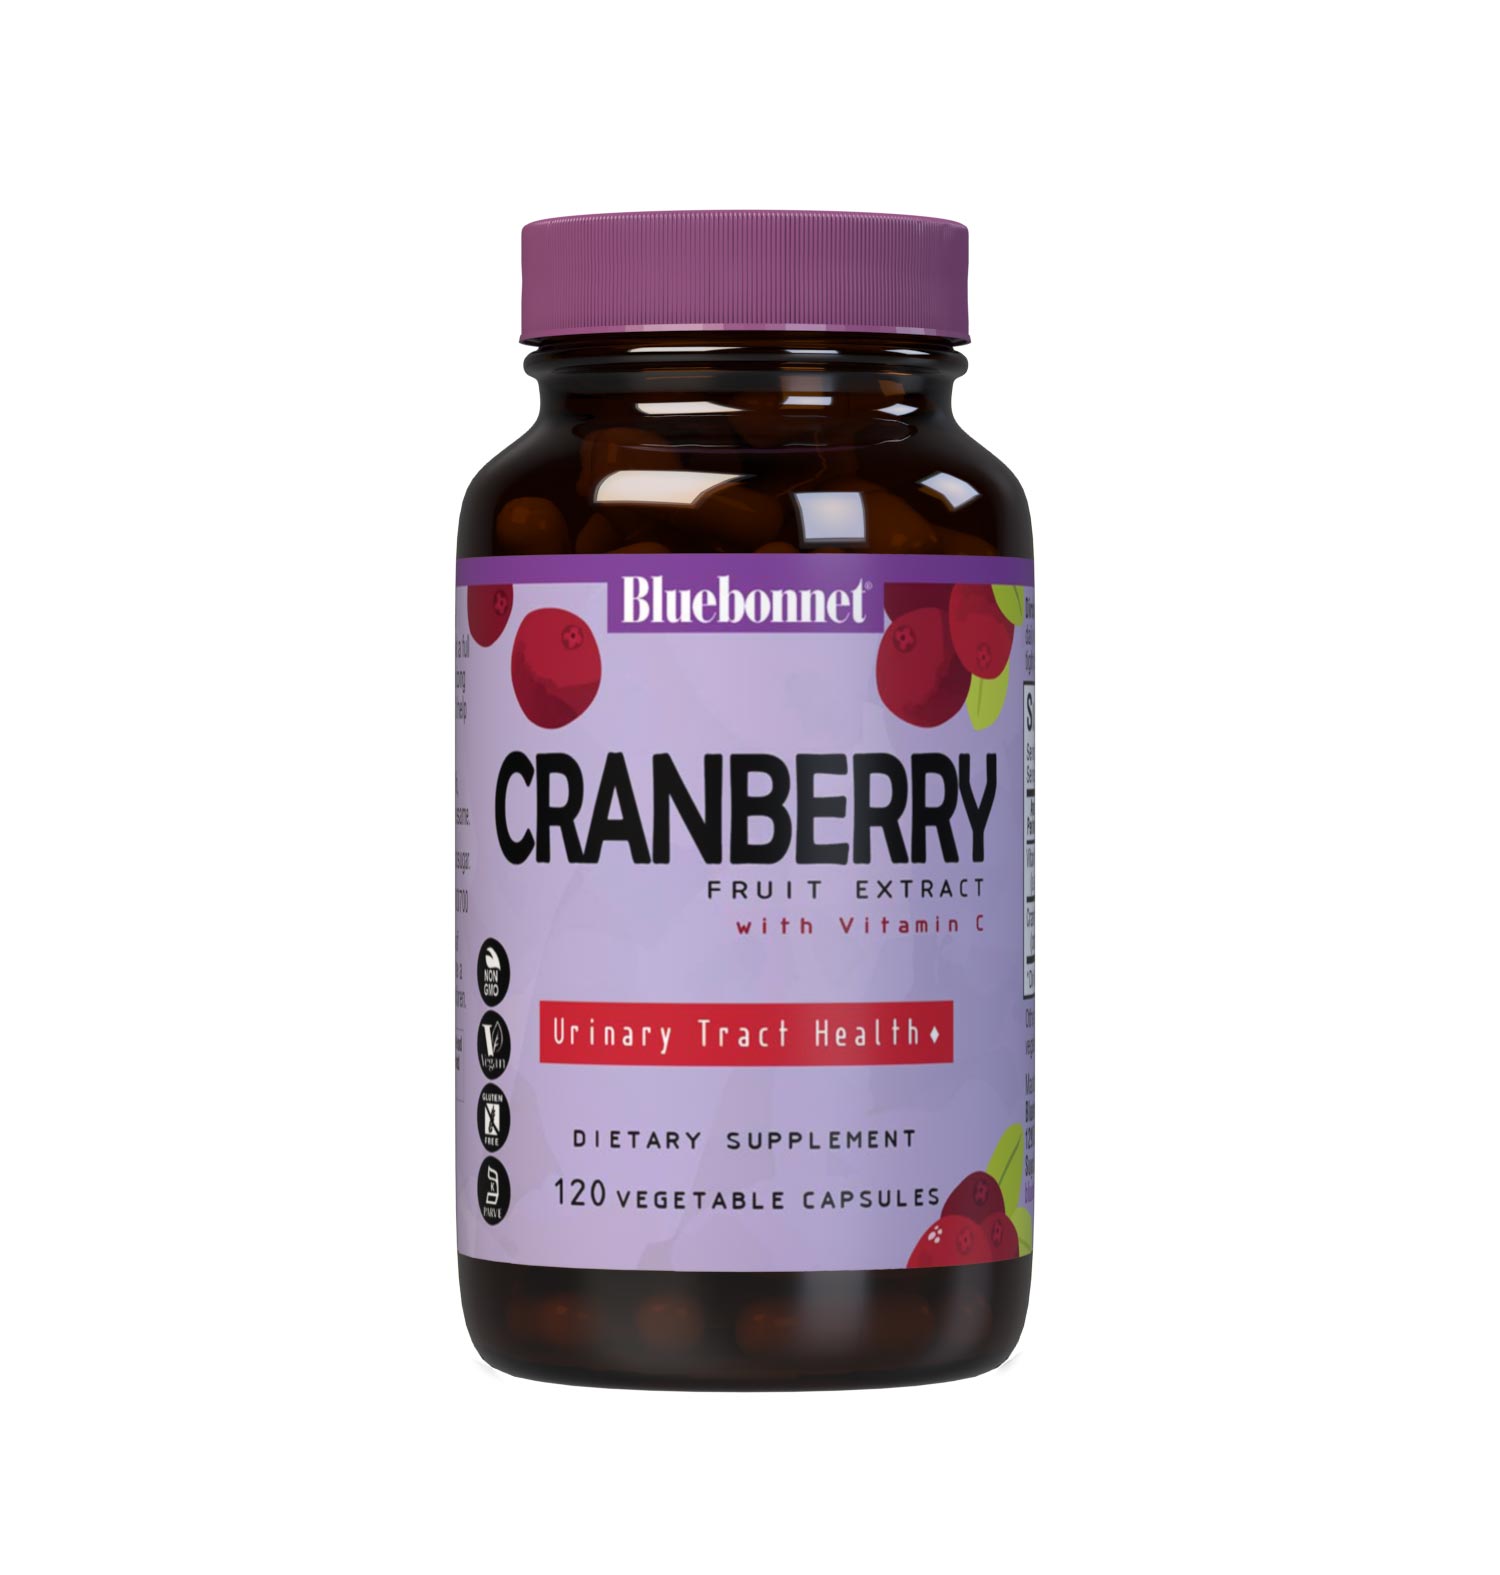 Bluebonnet’s Cranberry Fruit Extract with Vitamin C 120 Vegetable Capsules are Formulated with 500 mg of Cranberry Fruit Extract & 60 mg Identity-Preserved Vitamin C  to help support urinary tract health. #size_120 count